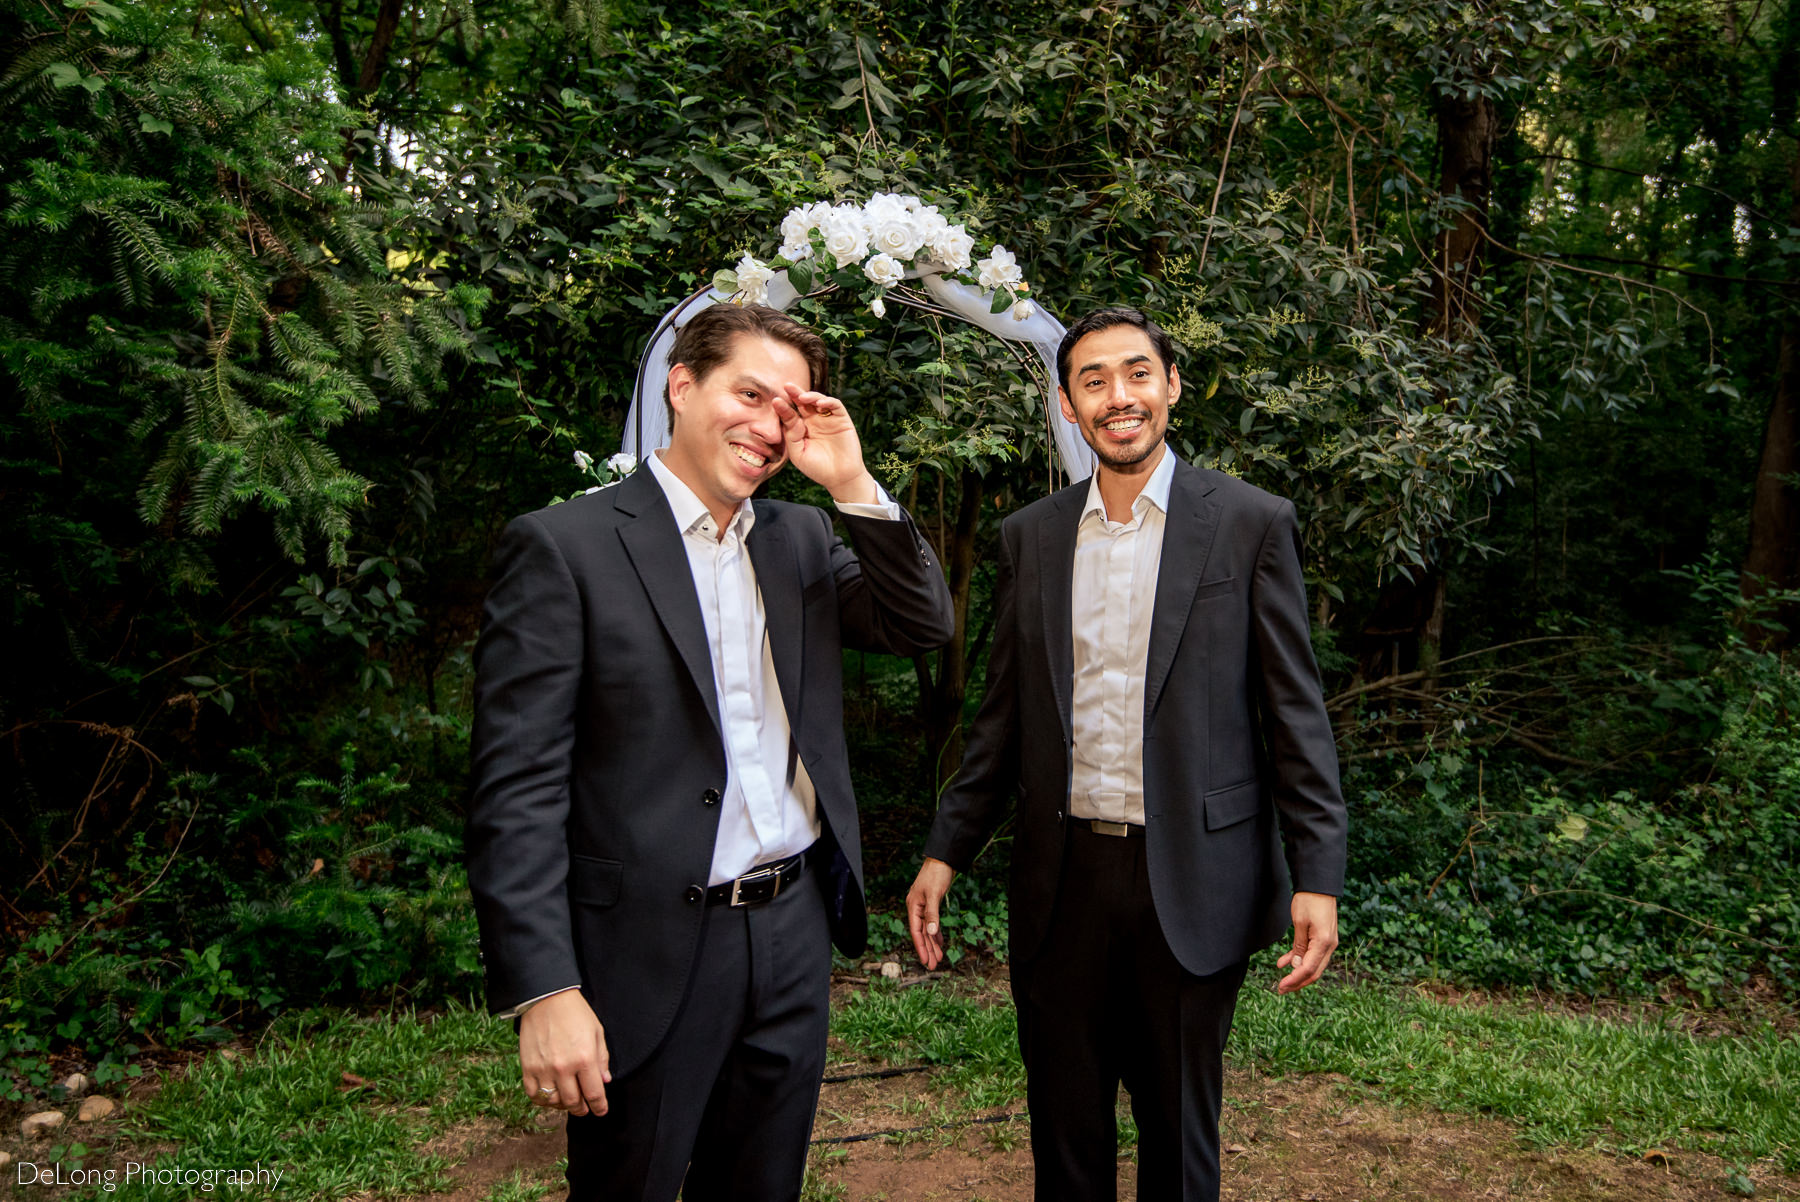 Candid photo of groom wiping tears from his eyes after a same-sex wedding ceremony by Charlotte wedding photographers DeLong Photography